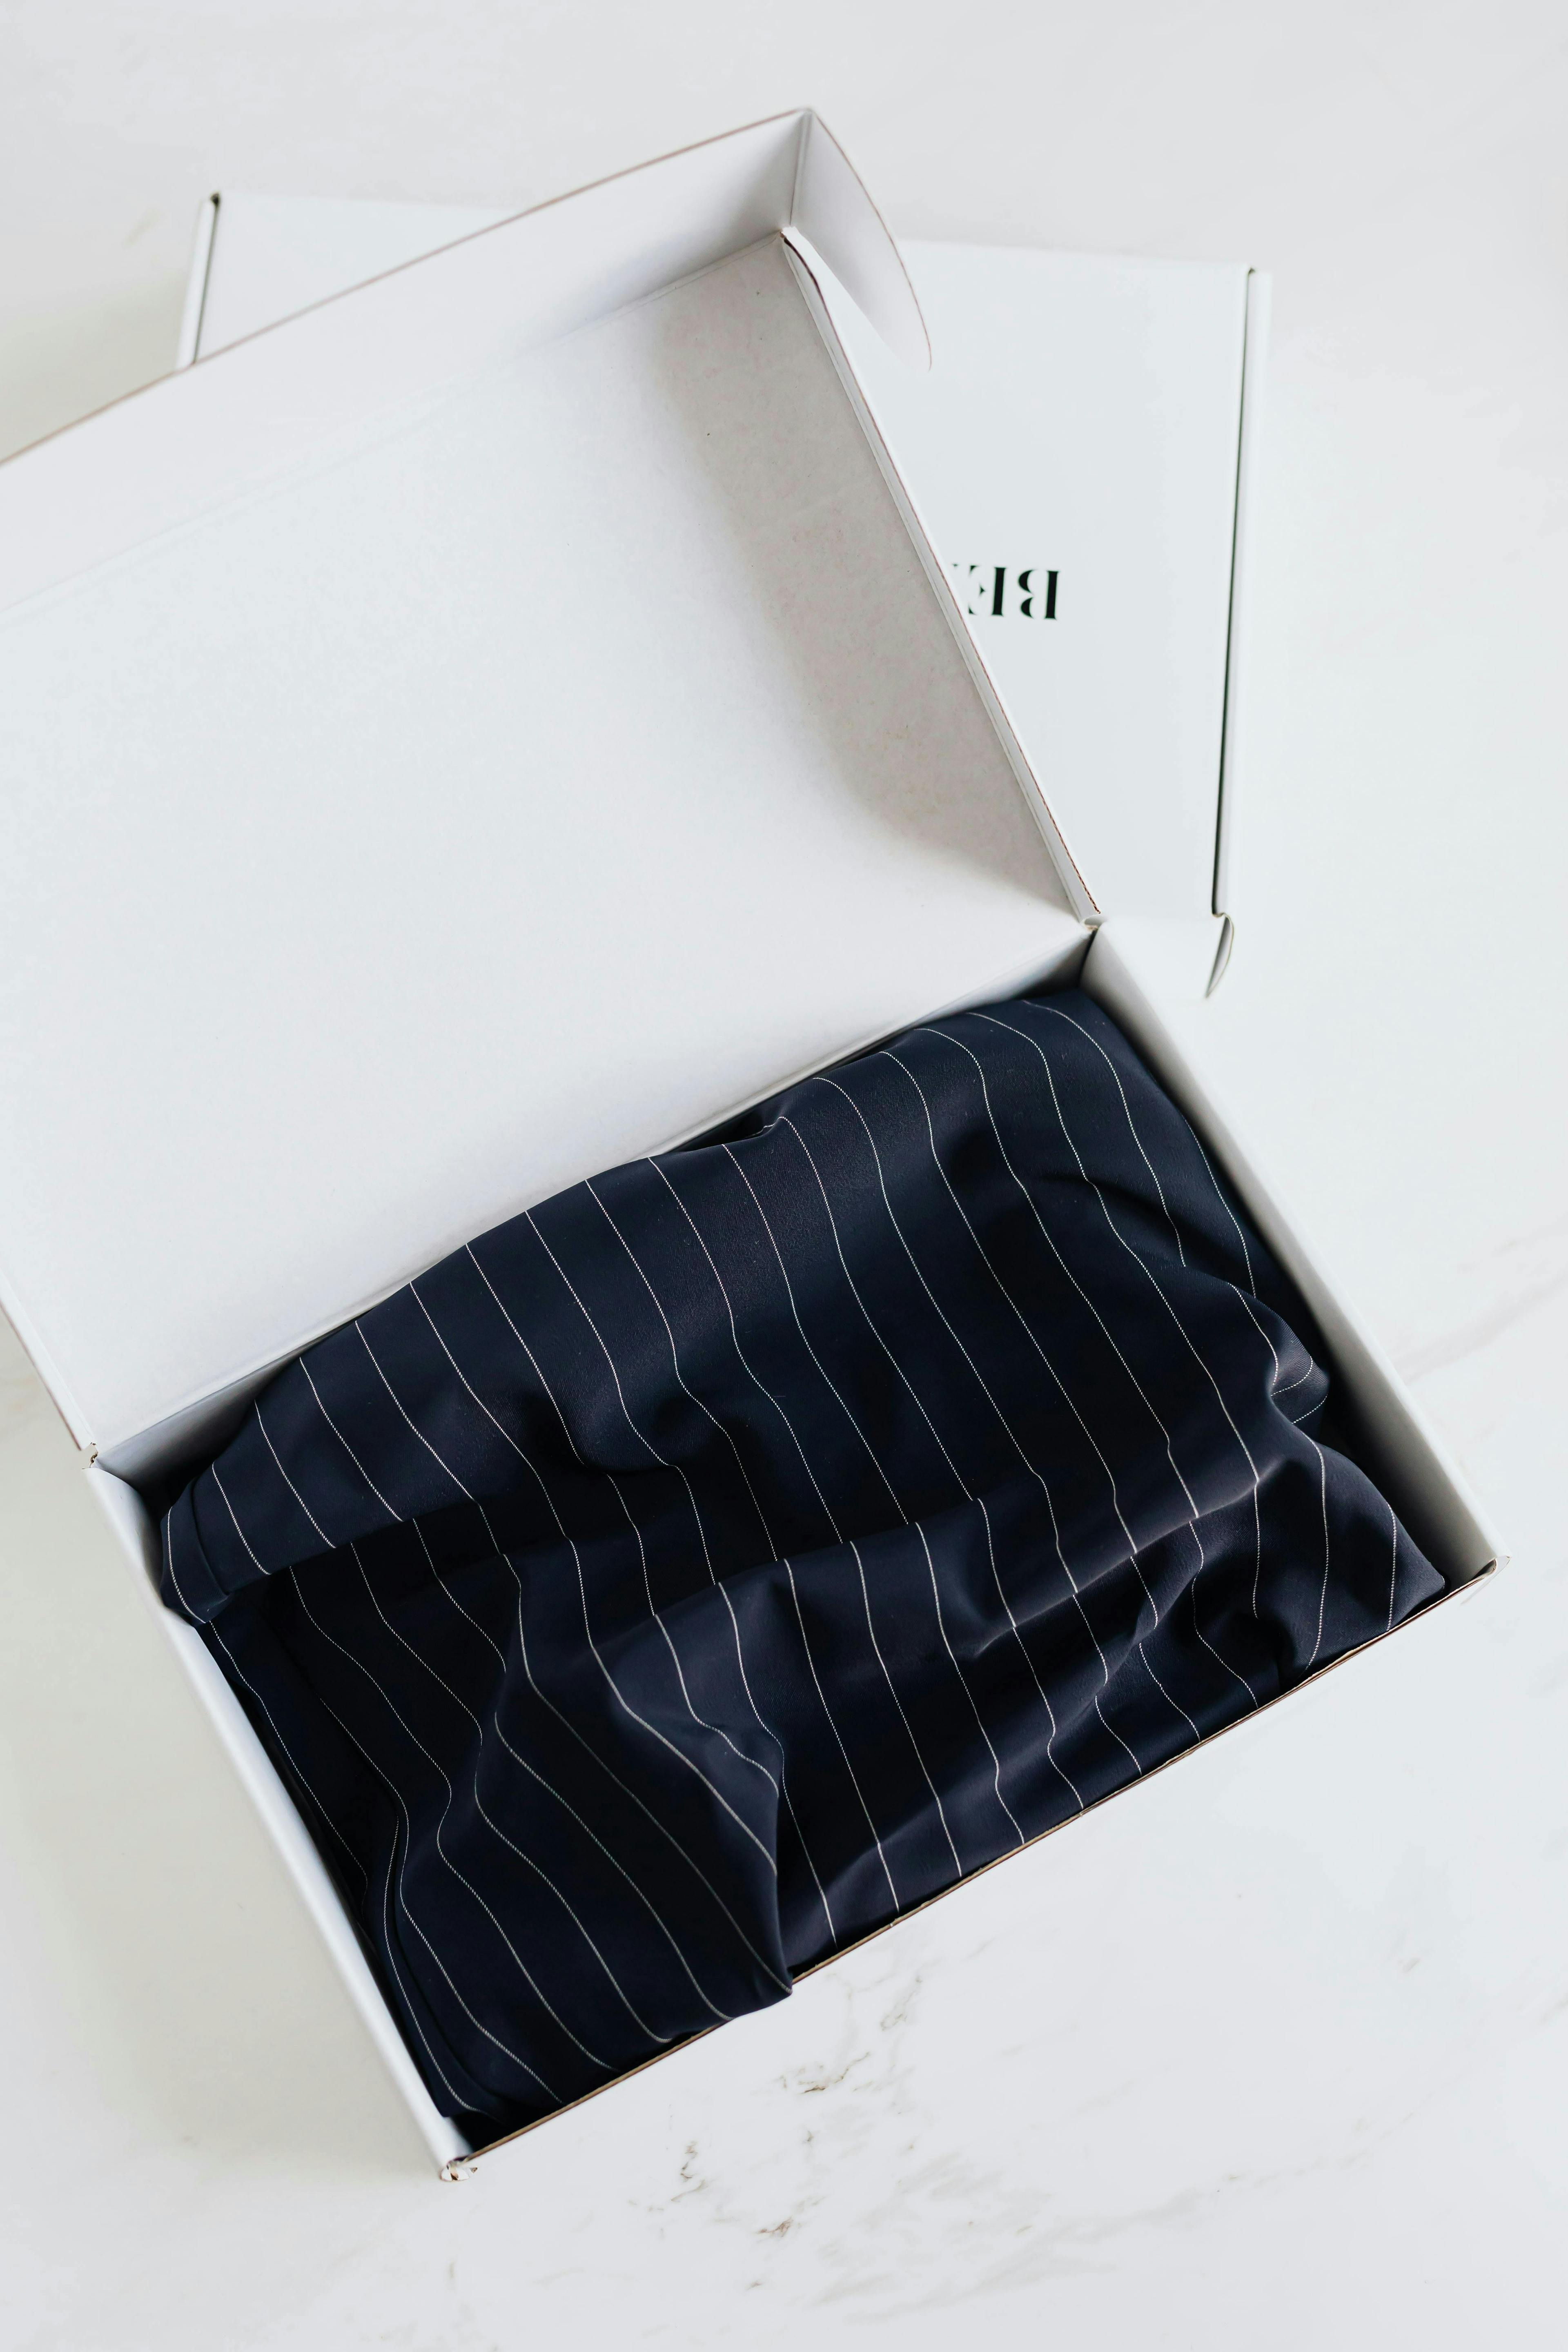 Ralph Lauren item in a white shipping package representing high-end packing. 